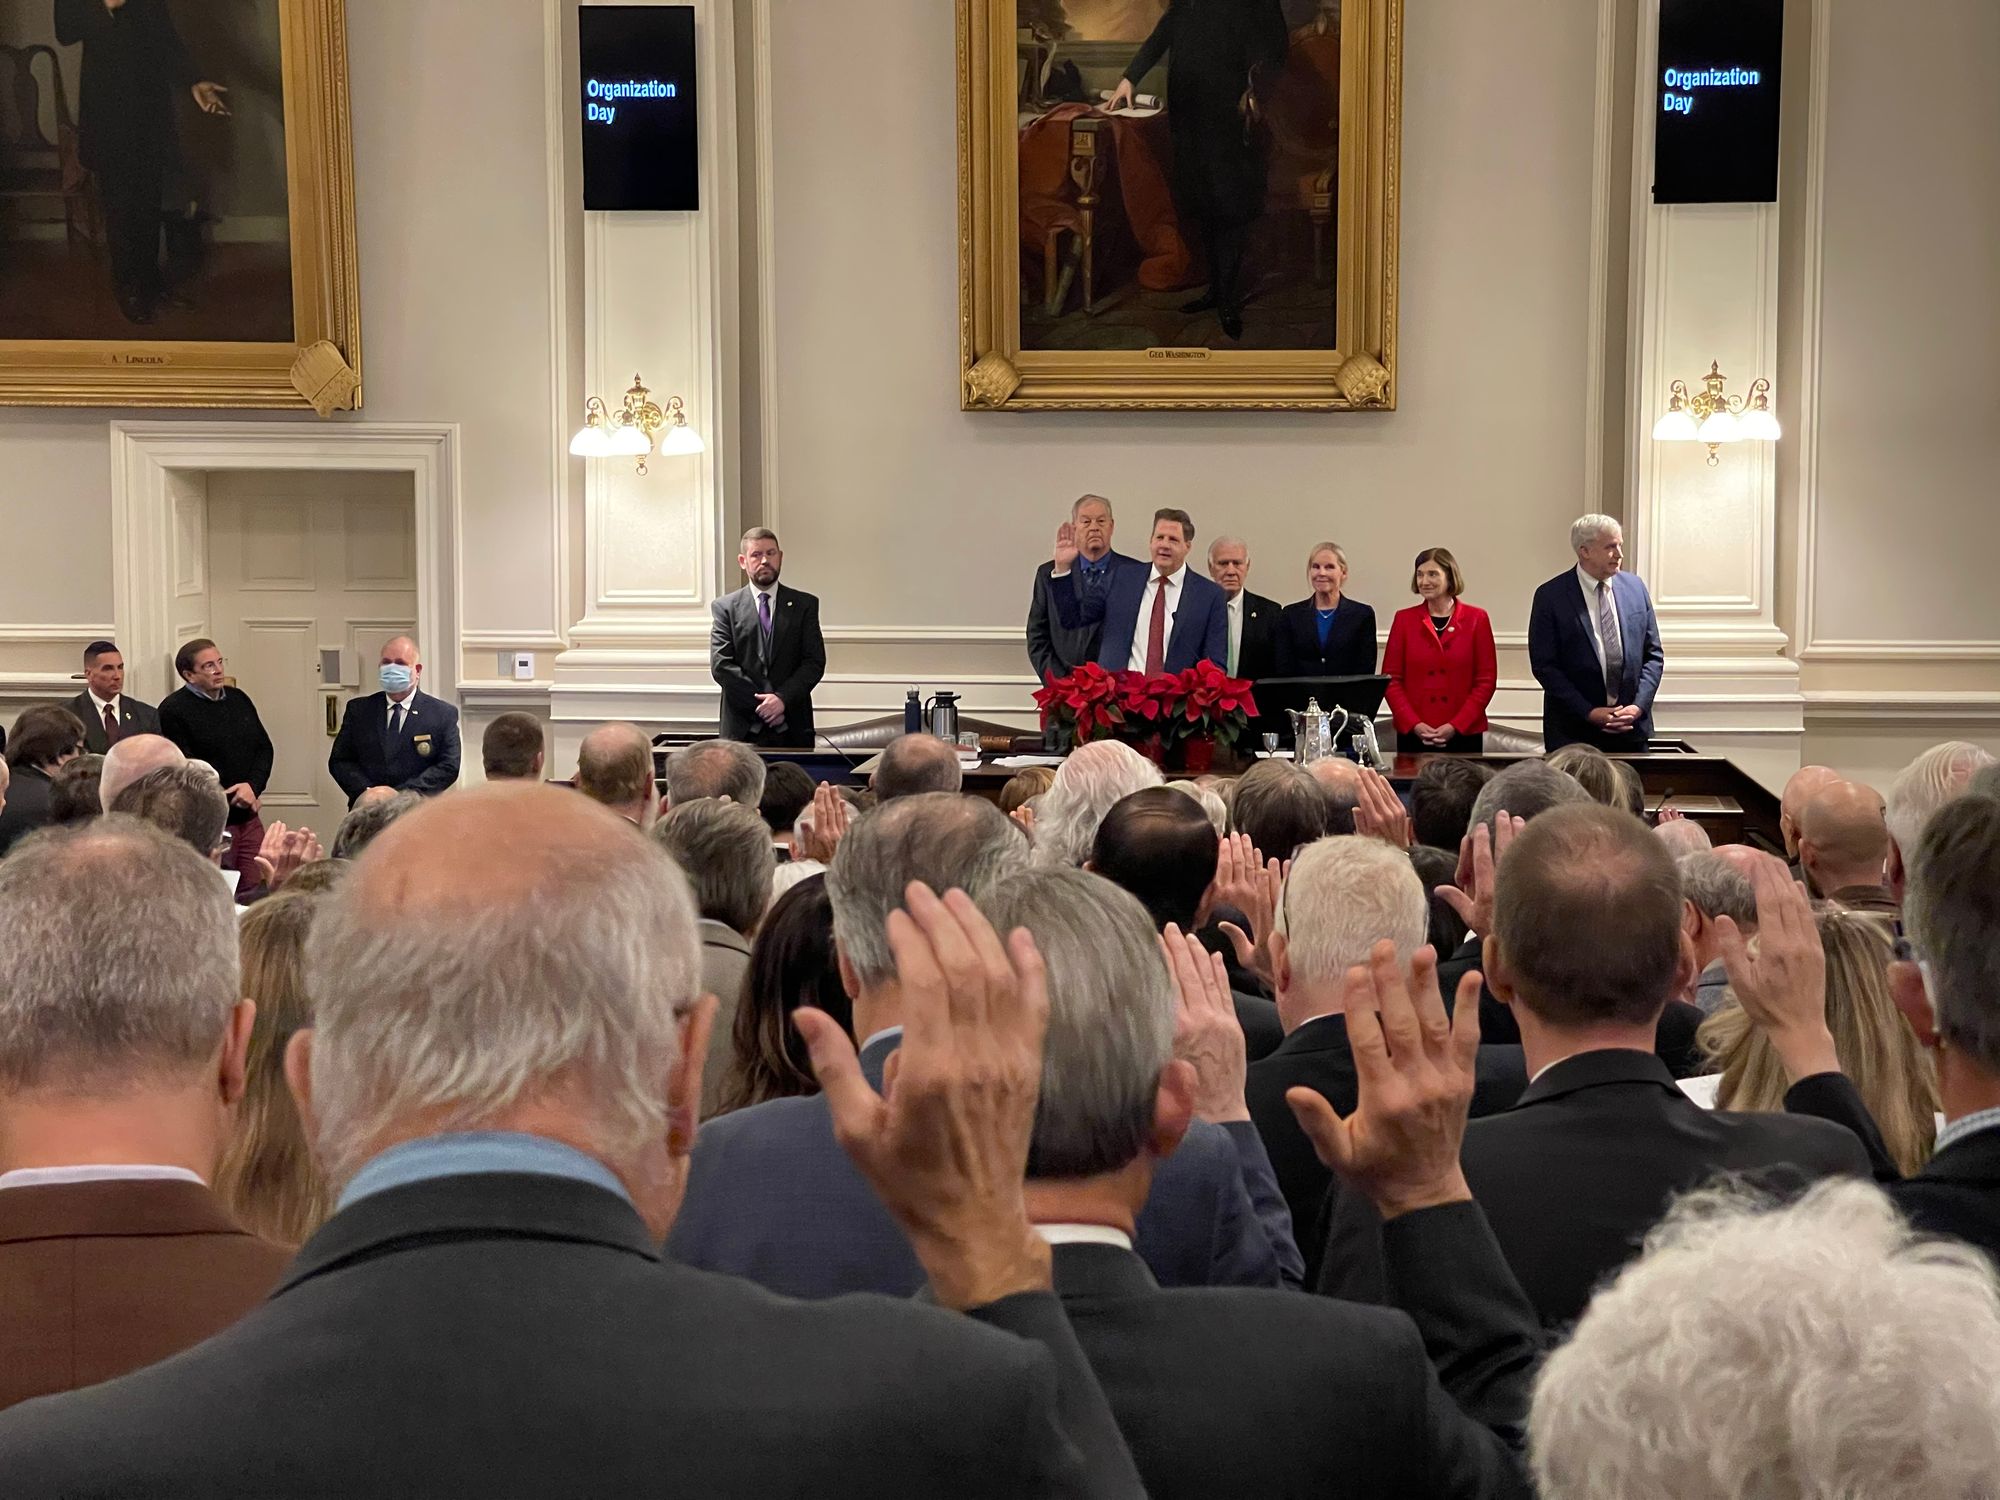 7 important things that happened Wednesday at the State House